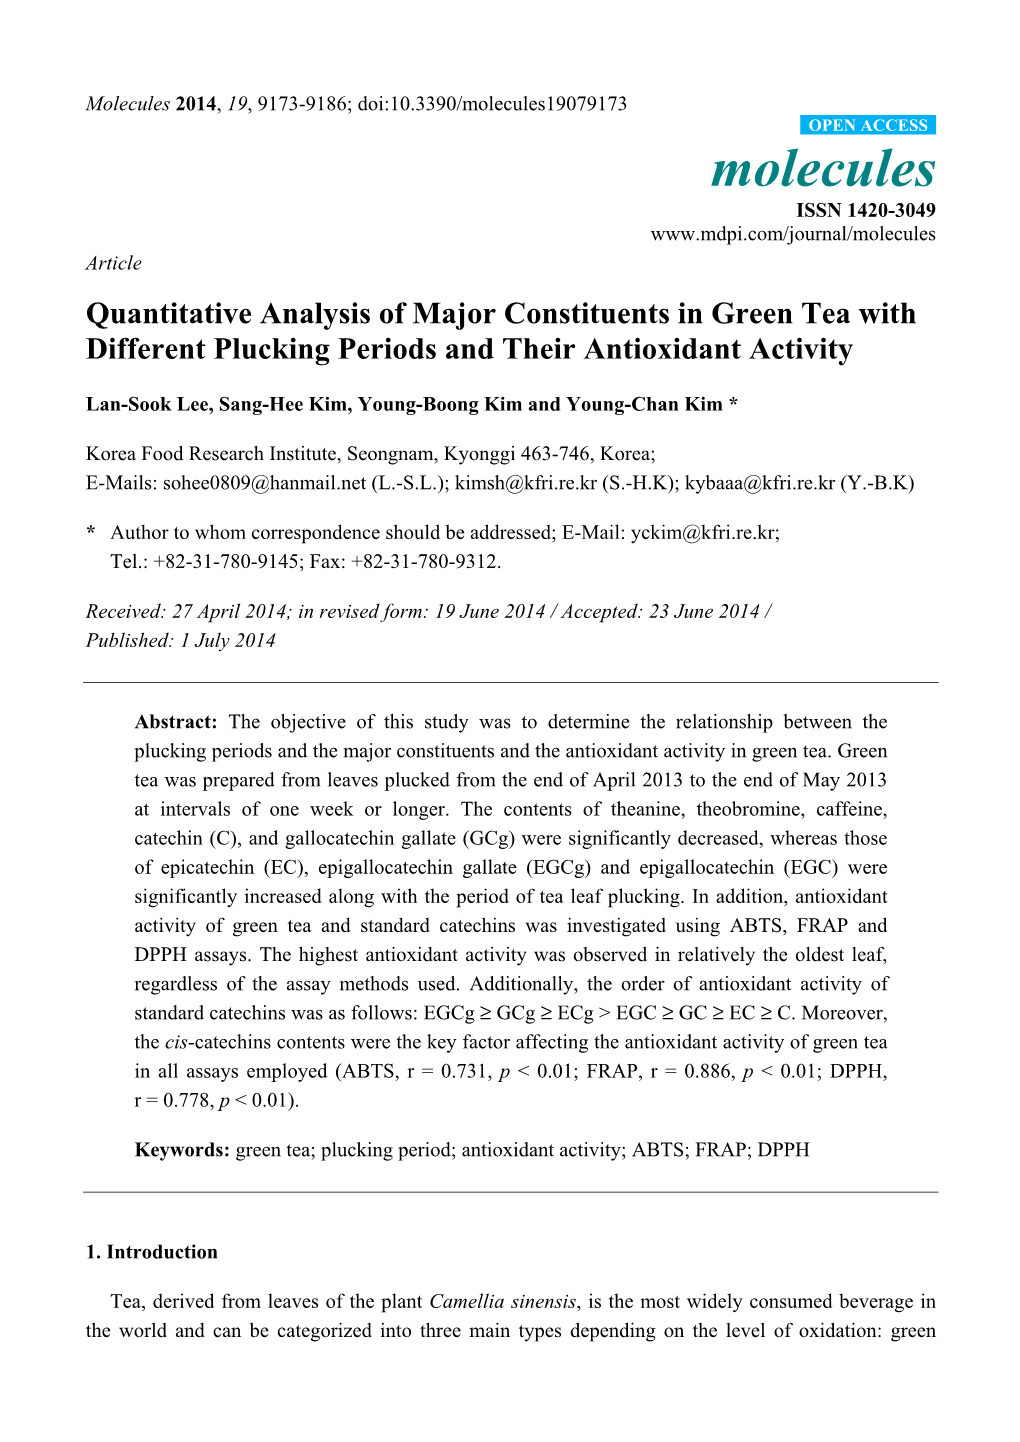 Quantitative Analysis of Major Constituents in Green Tea with Different Plucking Periods and Their Antioxidant Activity